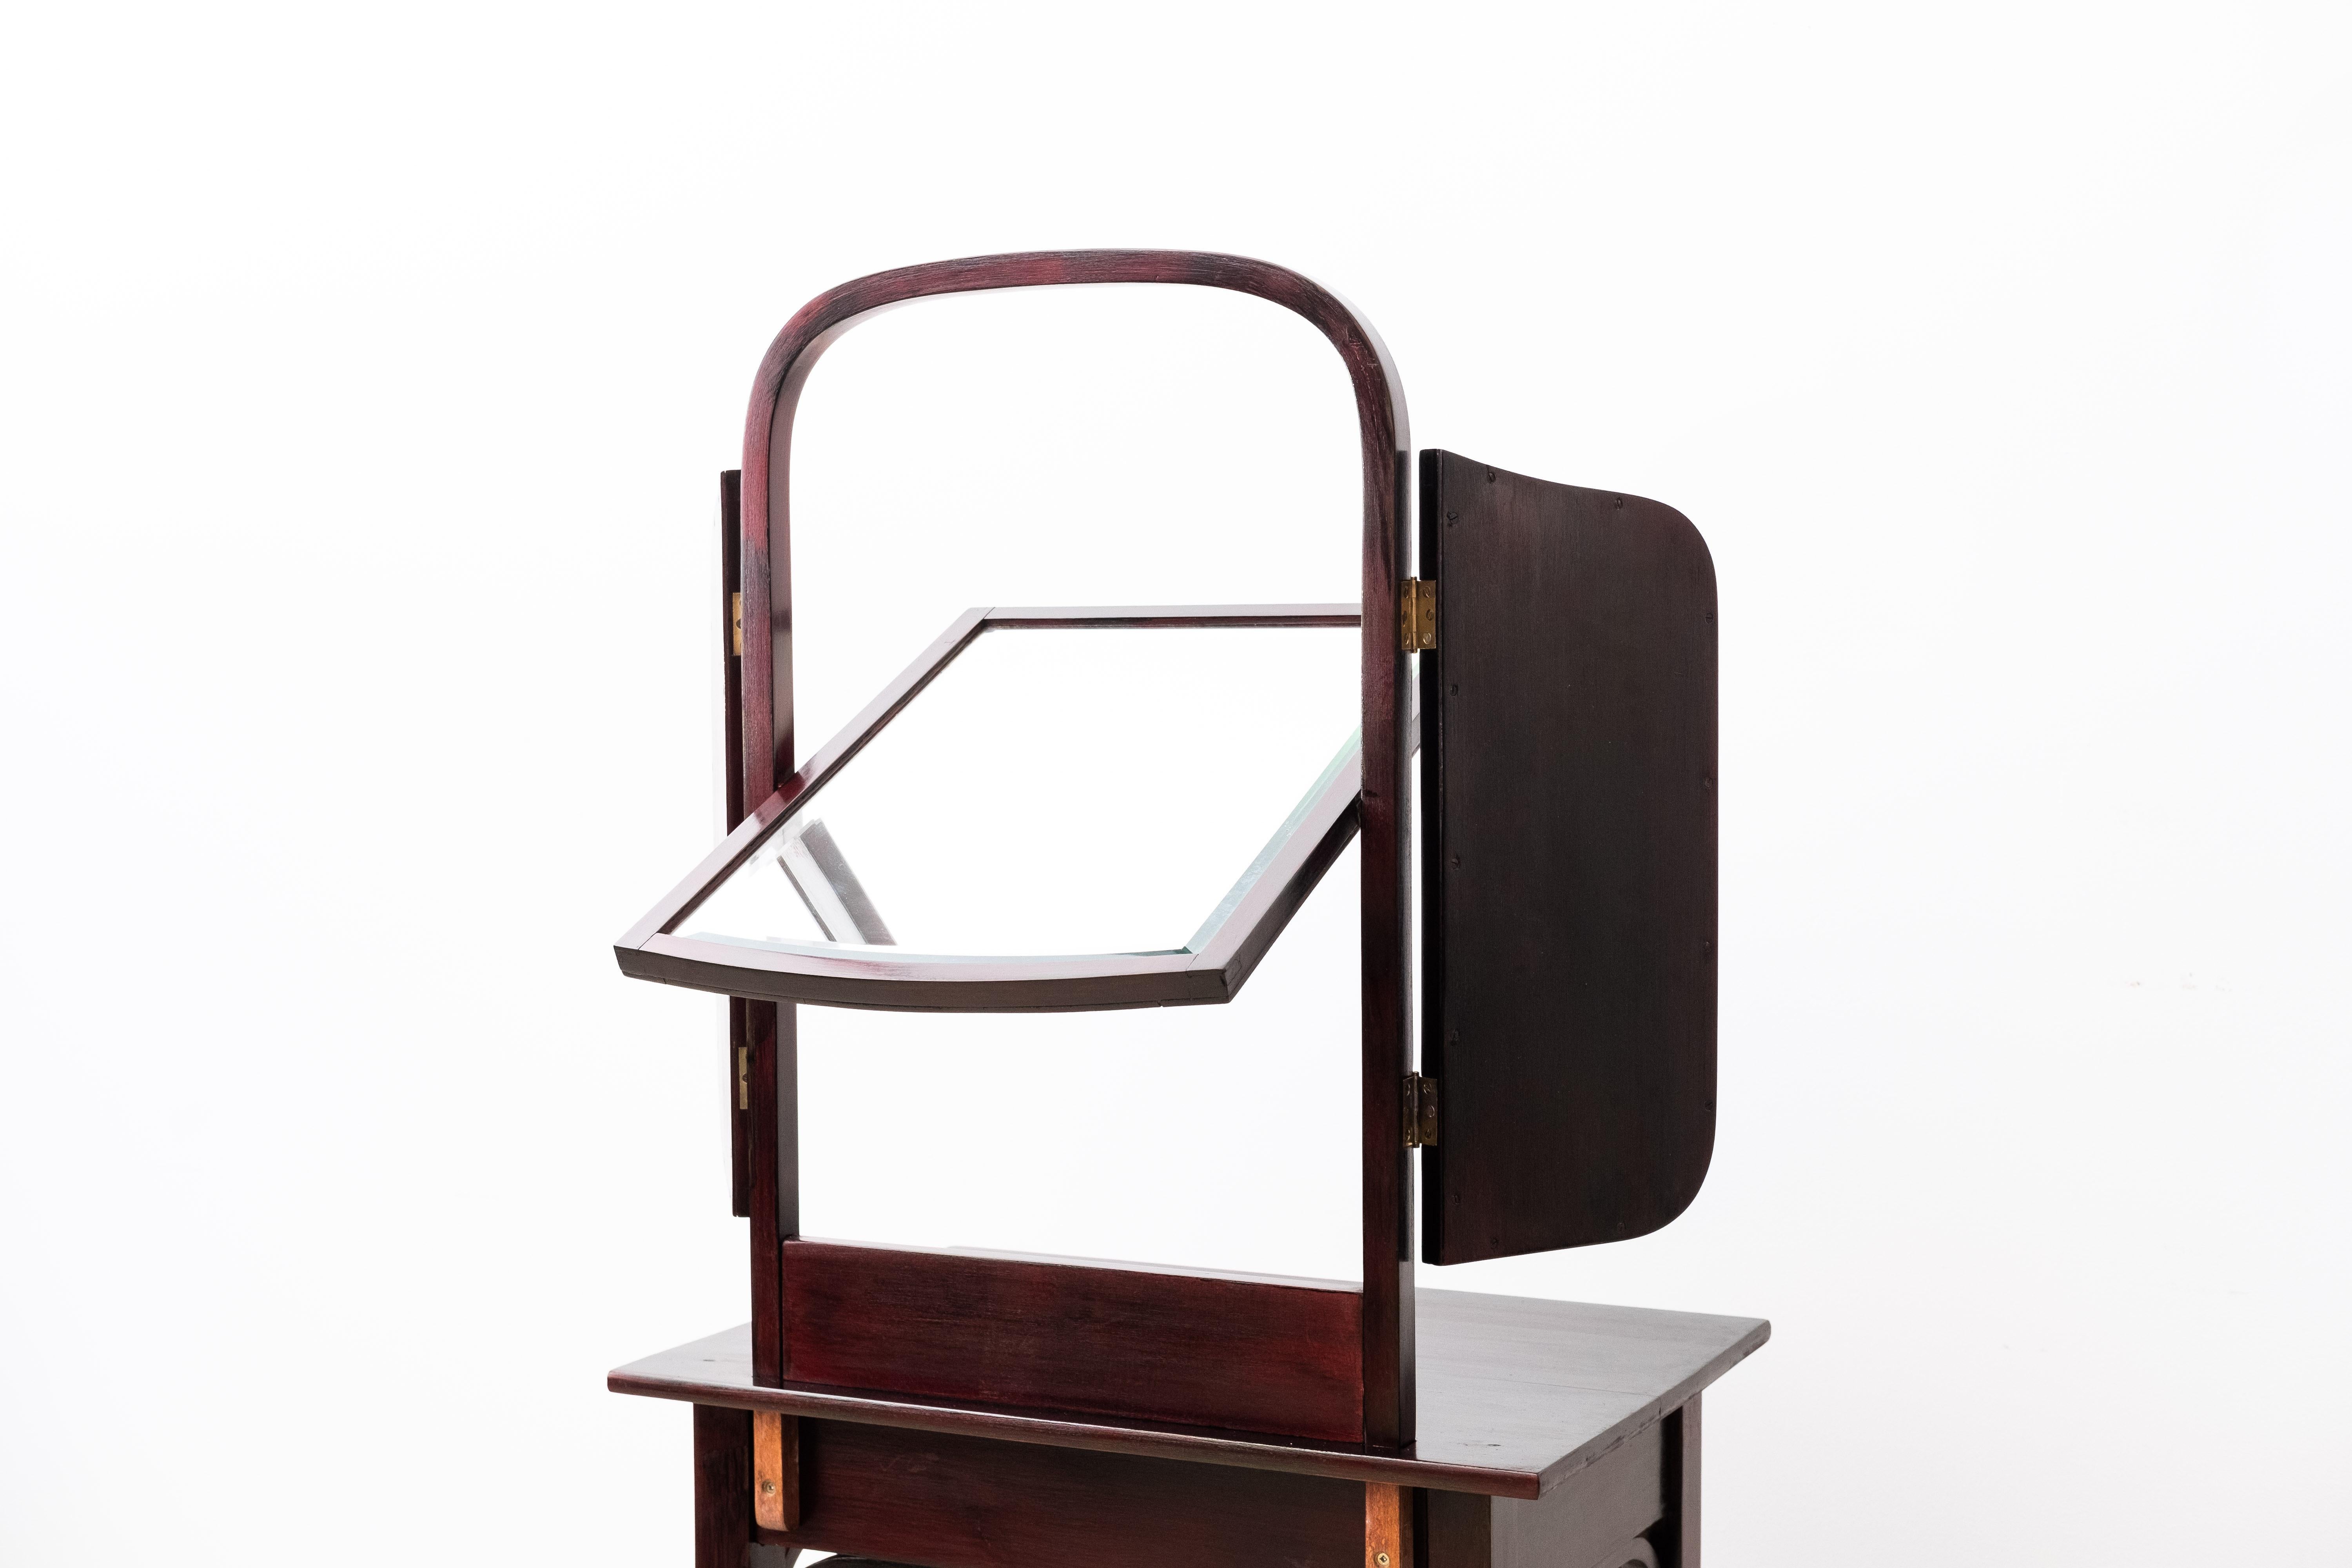 Art Nouveau Dressingtable from Thonet Brothers, Model 23045 (Vienna, 1910) For Sale 11